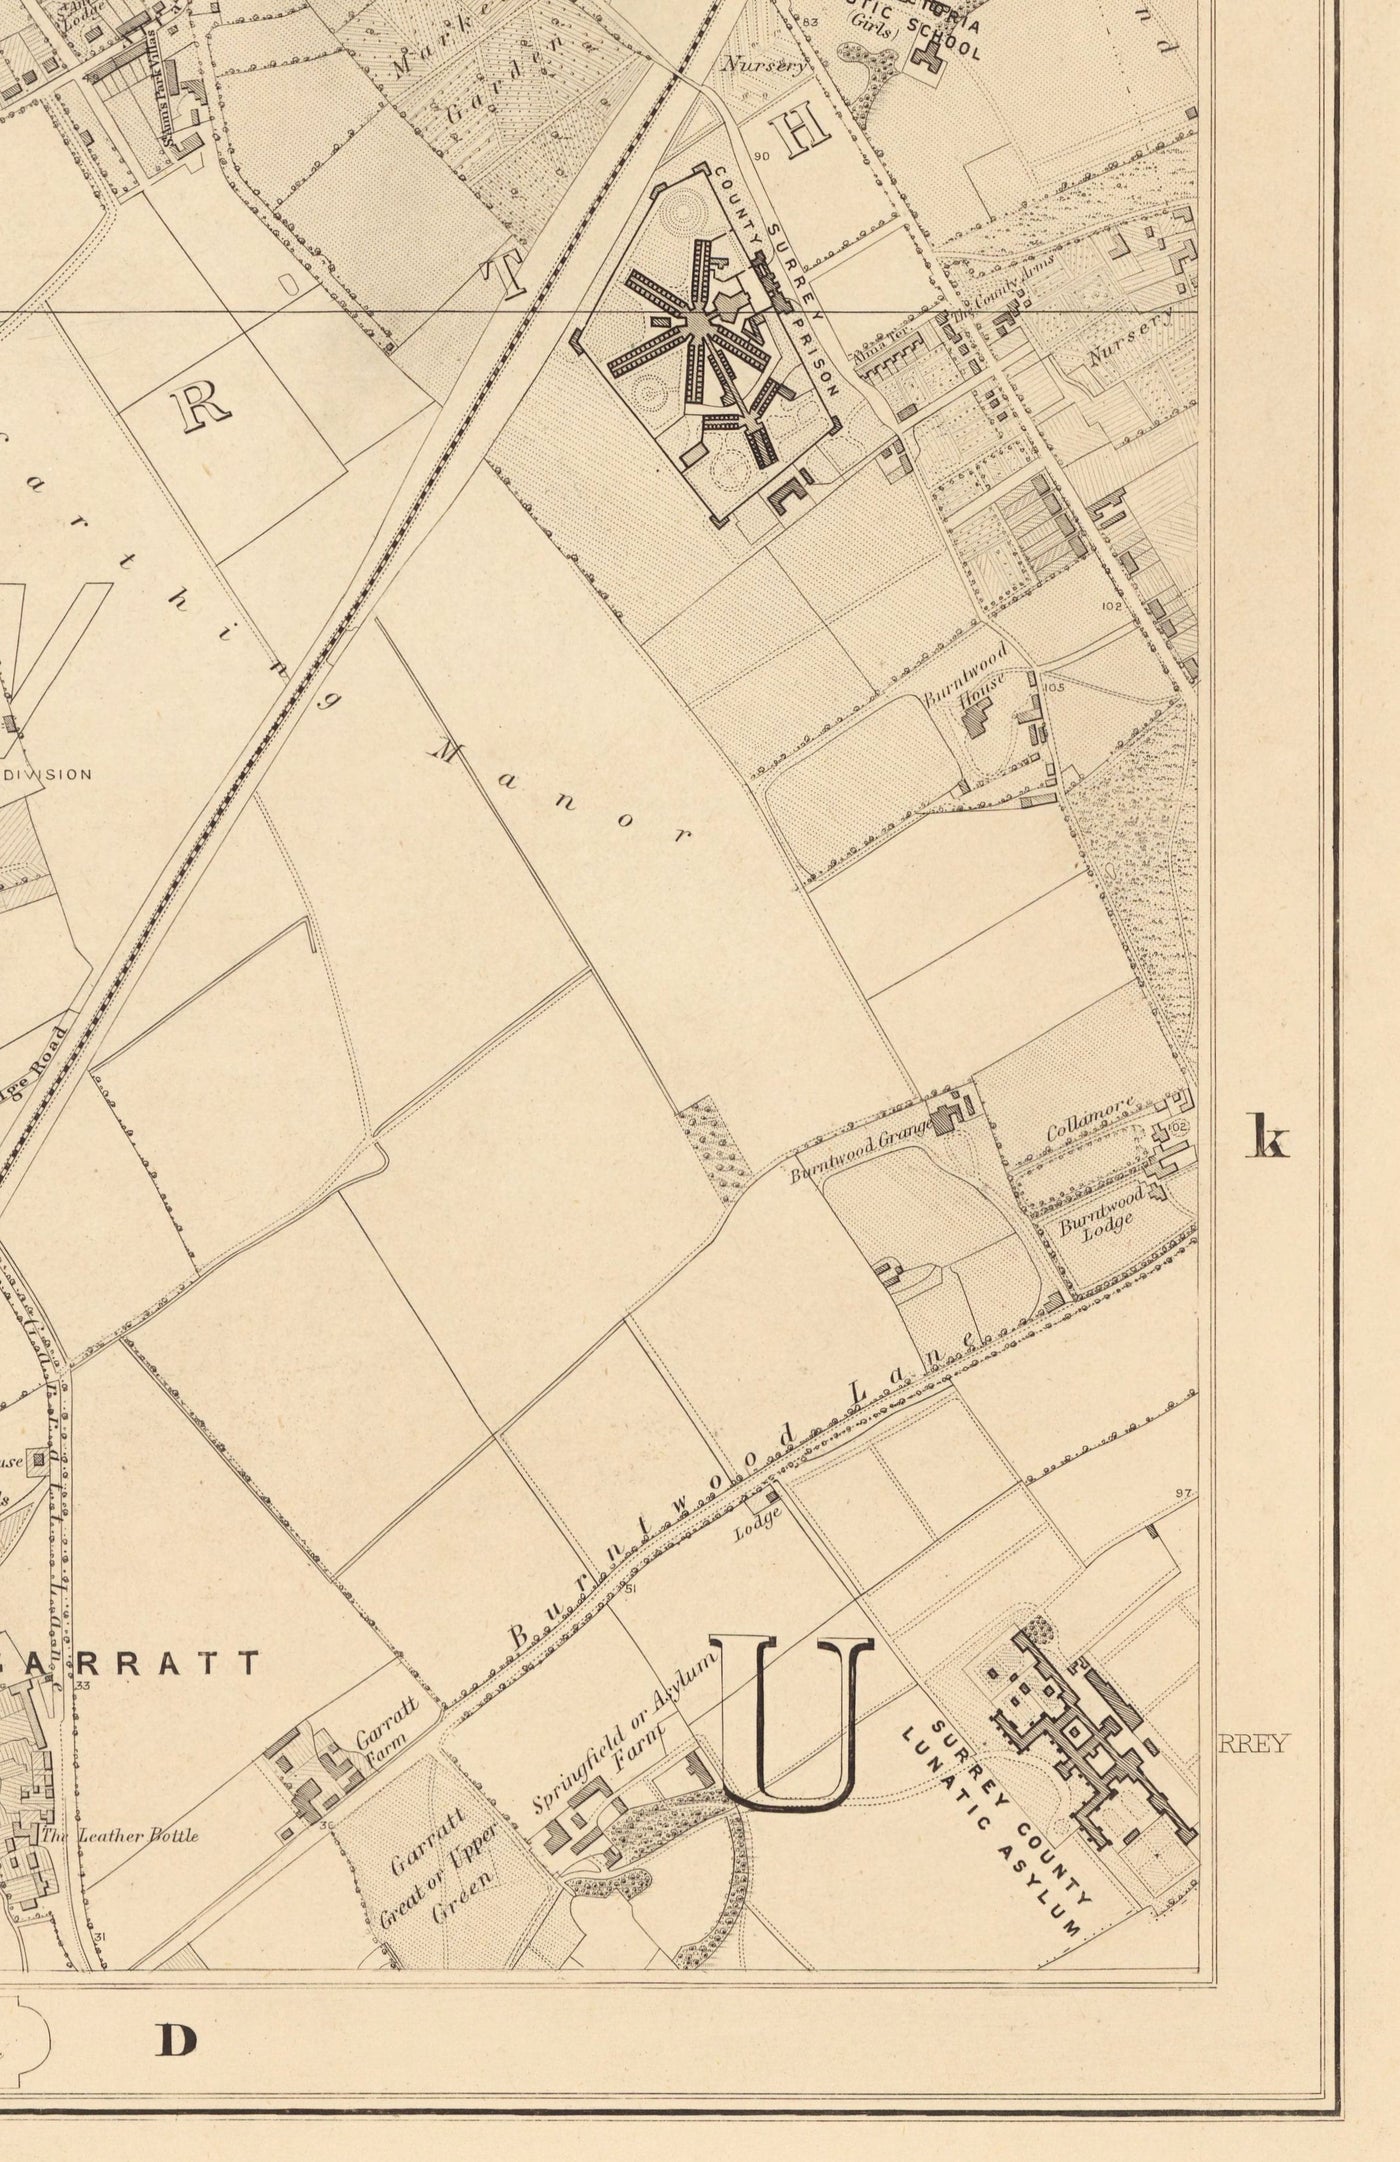 Old Map of South London by Edward Stanford, 1862 - Wandsworth, Wimbledon, Putney, Earlsfield, River Wandle - SW15, SW18, SW19